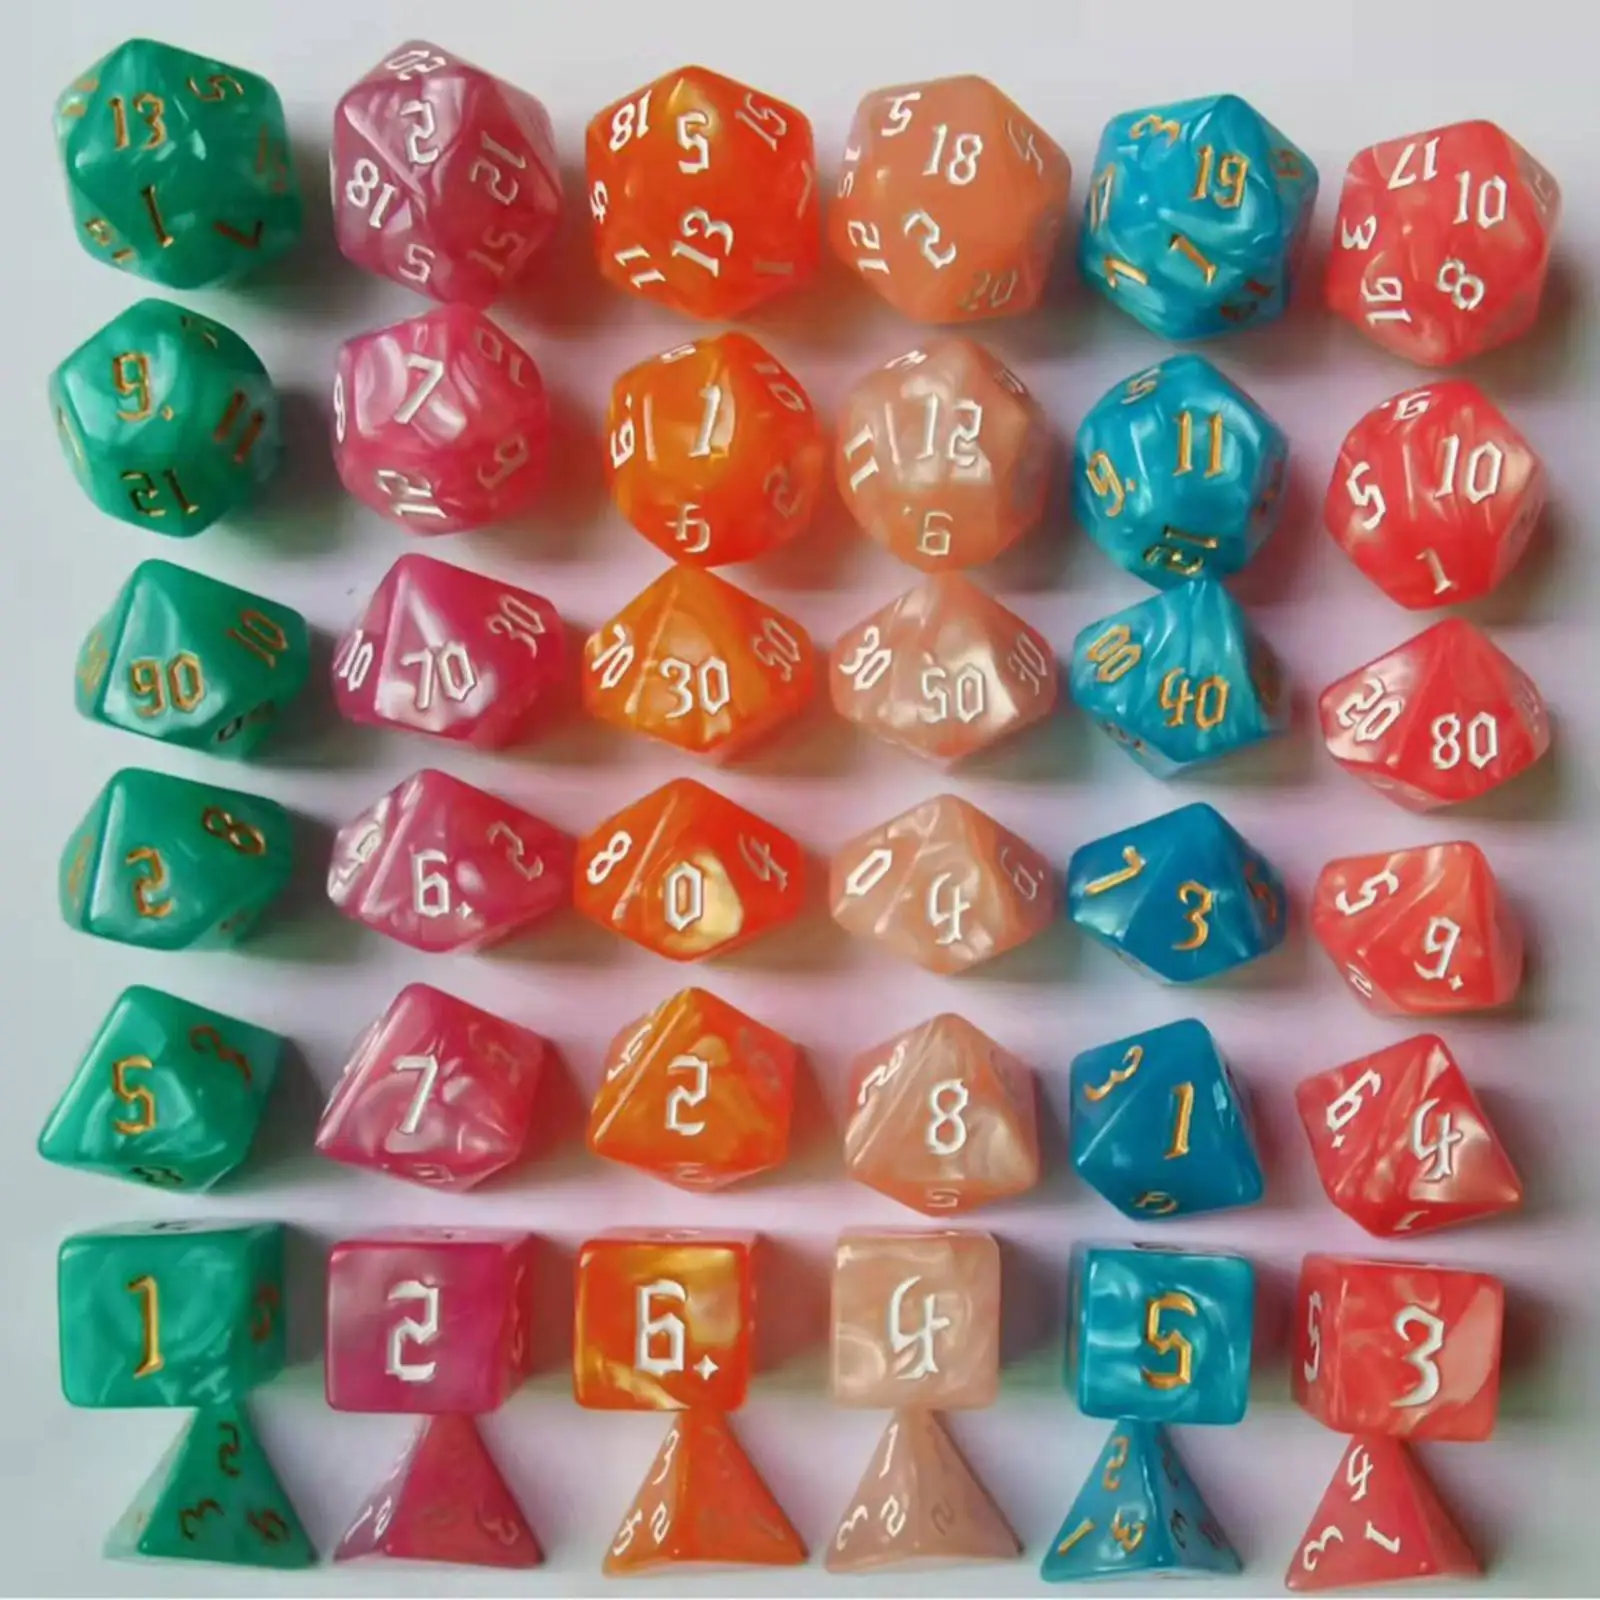 42x Acrylic Polyhedral Dices Set D4 D6 D8 D10 D12 D20 Multi Sided Dice Math Teaching Aids for DND RPG Games Puzzle Games Craft 